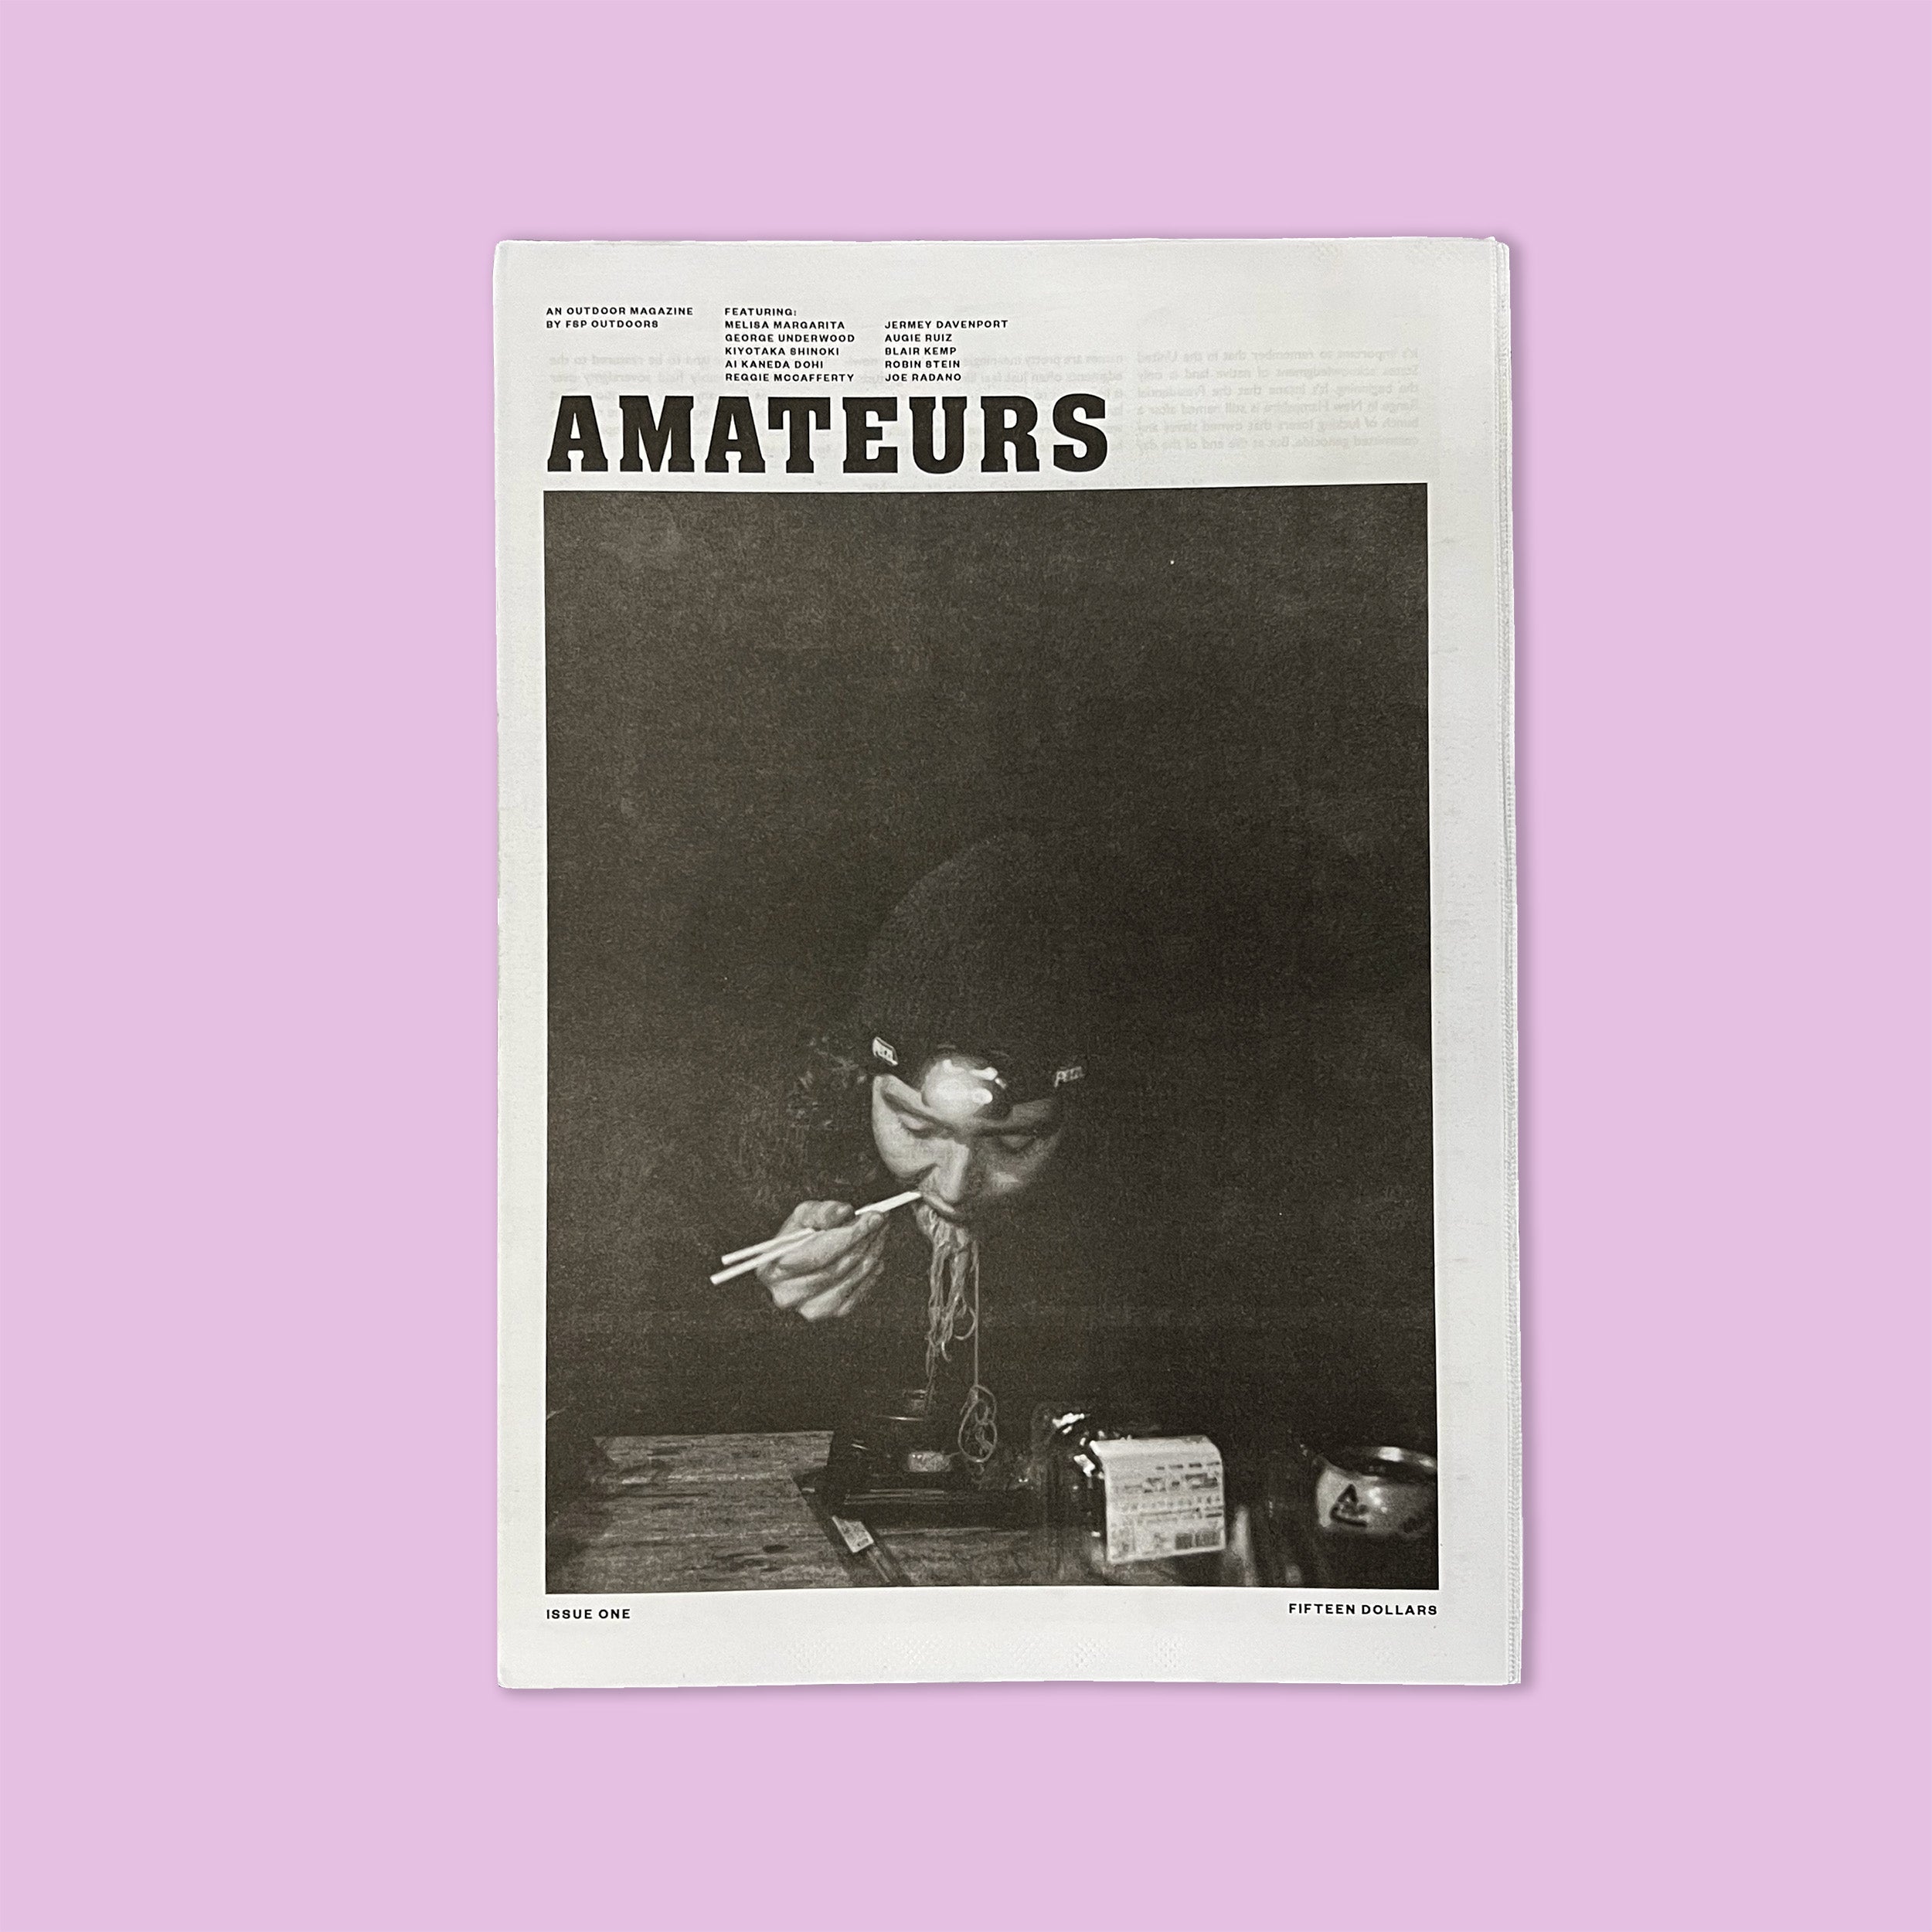 AMATEURS MAG - Photographs by FSP Outdoors